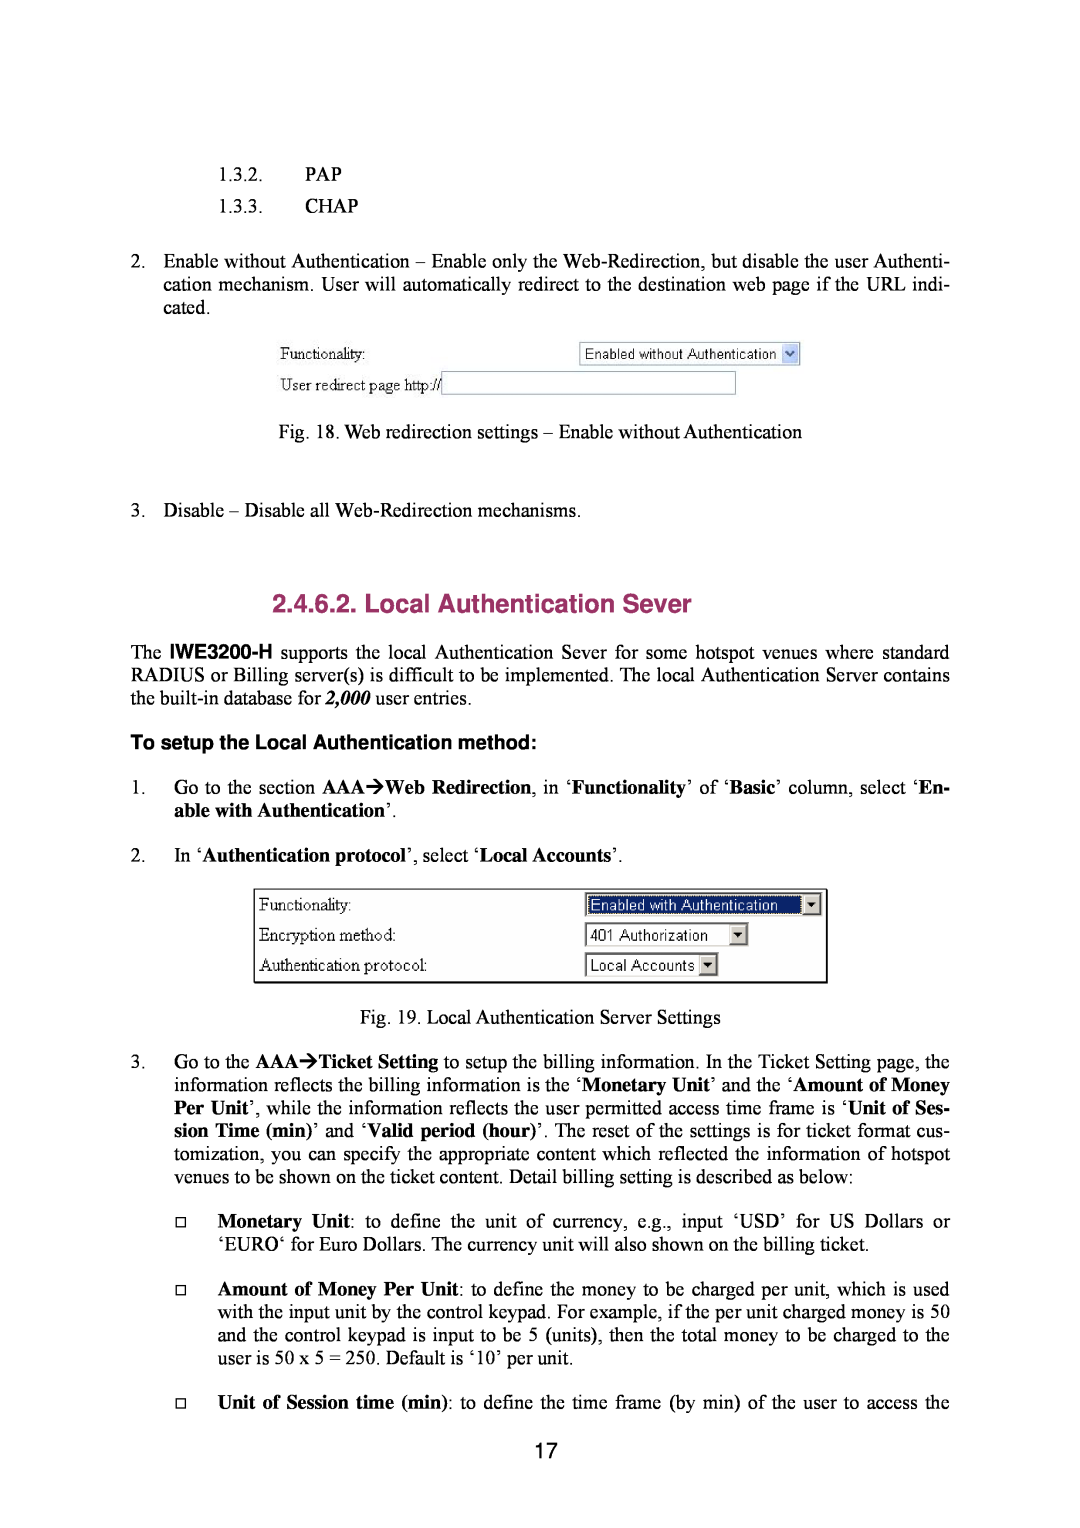 Epson IWE3200-H manual Local Authentication Sever, To setup the Local Authentication method 